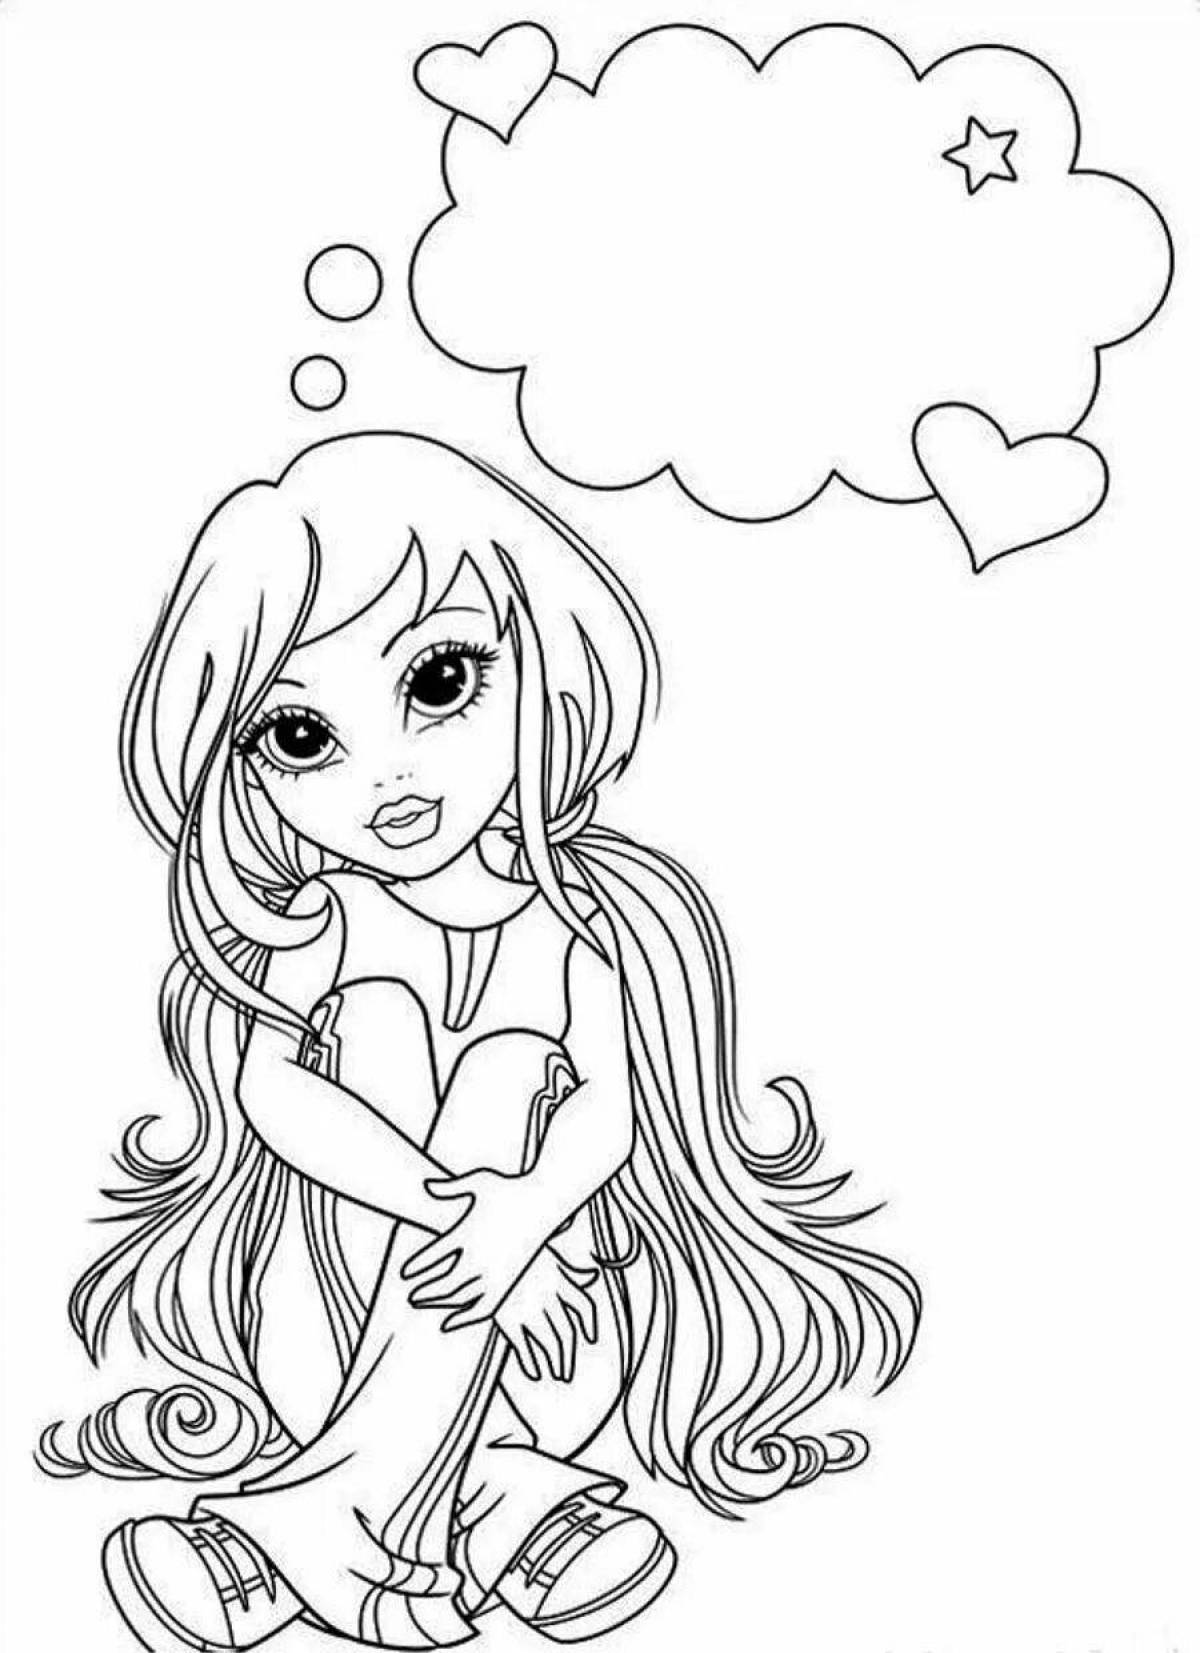 Adorable Coloring Pages for Girls 10 Years Old